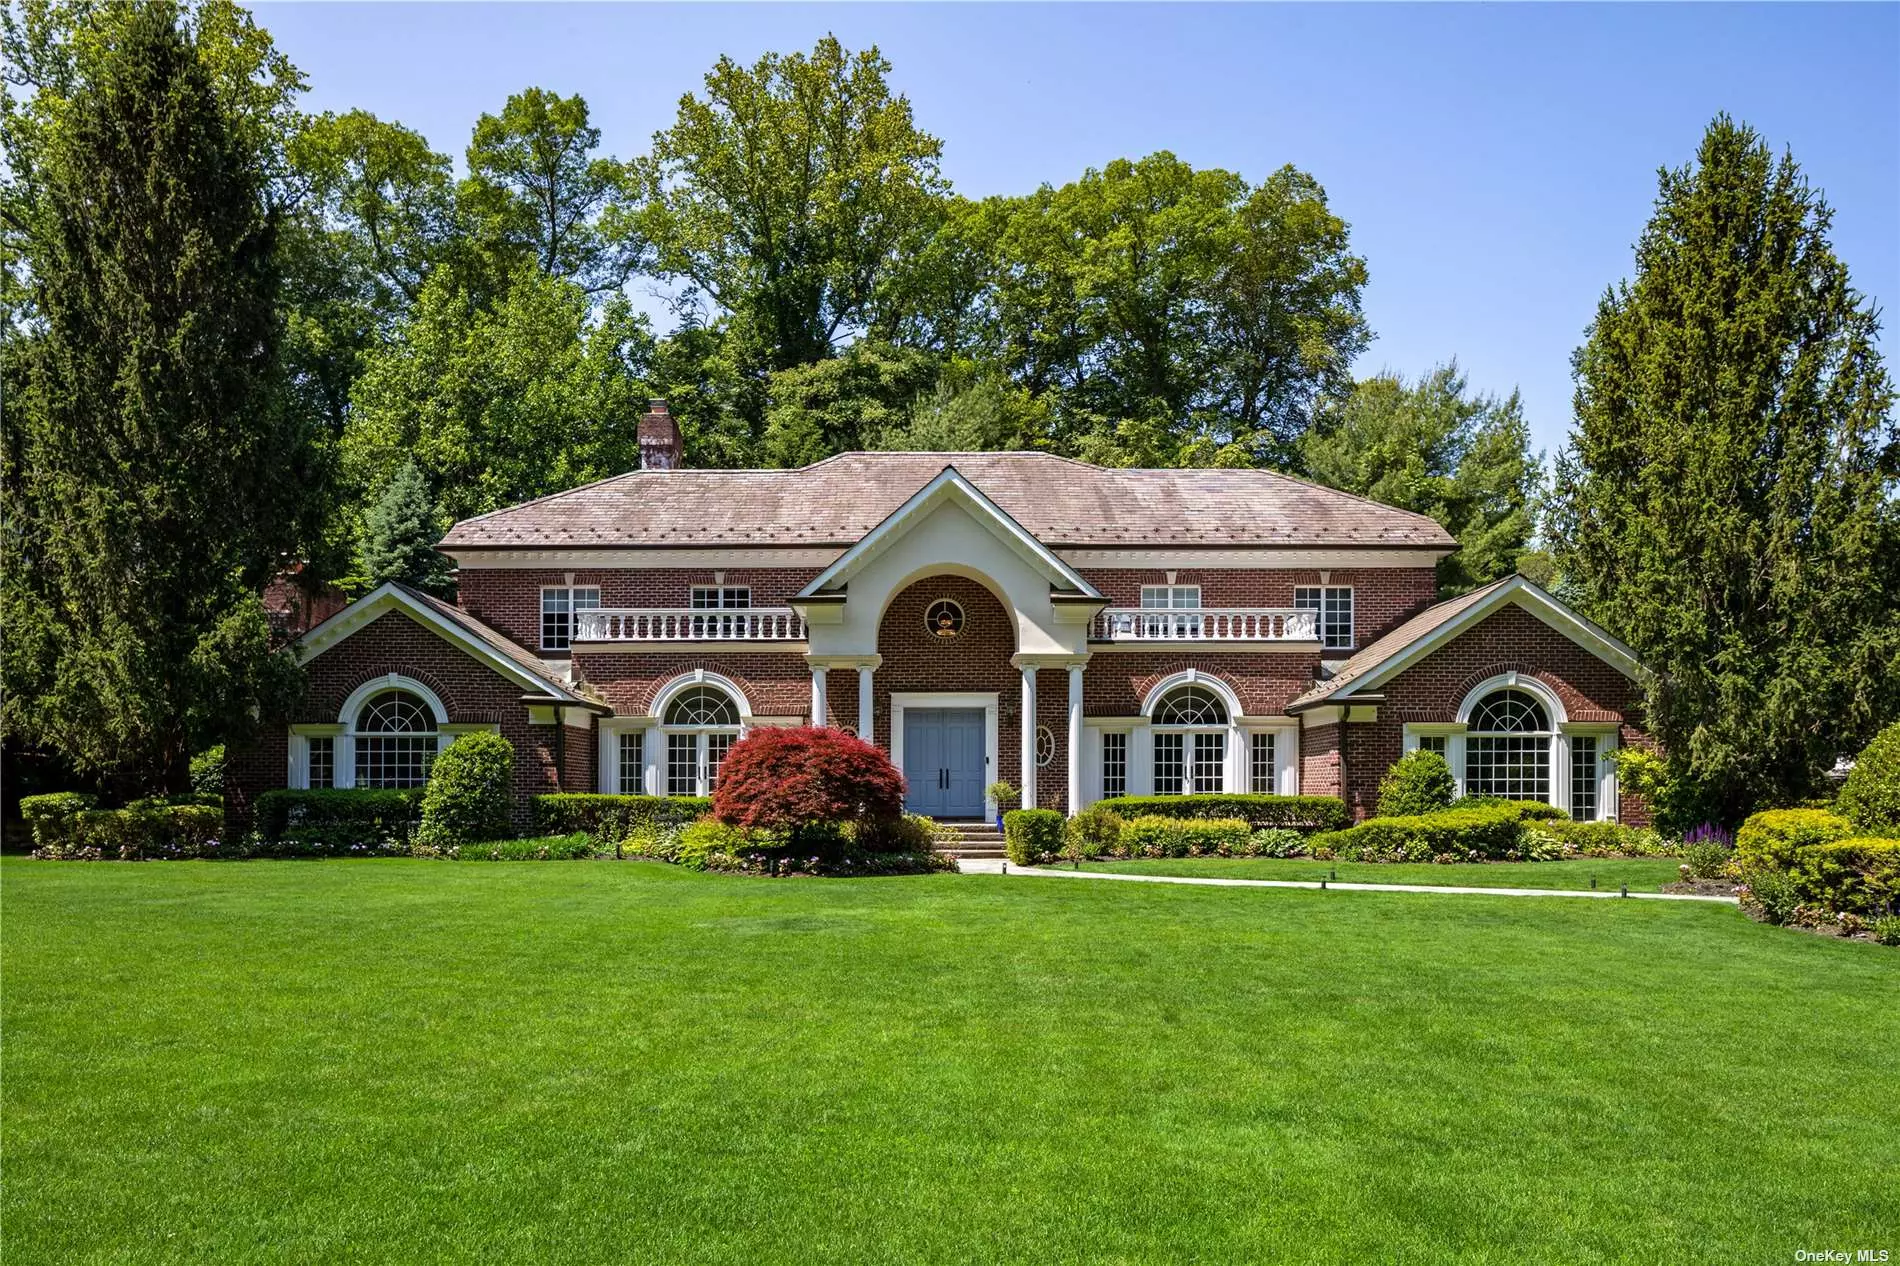 An Exceptionally Redesigned Center Hall Brick Colonial on 1.06 lush Acres in the sought-after Flower Hill Community of Manhasset, NY. Totaling roughly 6, 247 Sq.Ft. of Interior Living Space, this bright home boasts tall 11ft. ceilings, brand new hardwood floors, large entertaining areas including a Den with a Wet-Bar, great for hosting guests, and a Modern, Eat-In Kitchen with Marble Countertops, oversized Rose-Gold Hardware, beautiful Textured Wallpaper and Five-Star Wolf/ SubZero Appliances. Featuring a Master Suite Oasis, with multiple Walk-In Closets and a Spa-Like Bathroom with Radiant-Heat Stone Floors, a Steam Shower and a Stand-Alone Soaking Tub. Additional home details include 4 more Bedrooms and 3.55 Bathrooms, a Finished Basement with a Fitness Room, an Attached 3-Car Garage and a flat backyard with a large slate patio and matured privacy plantings. Architecturally pleasing, the home is outfitted with elegant crown moldings, thick-cut millwork, hallways adorned with curved ceilings, seamless built-ins and an abundance of natural light. Located on a private, cul-de-sac street, within the esteemed Manhasset Union Free School District.